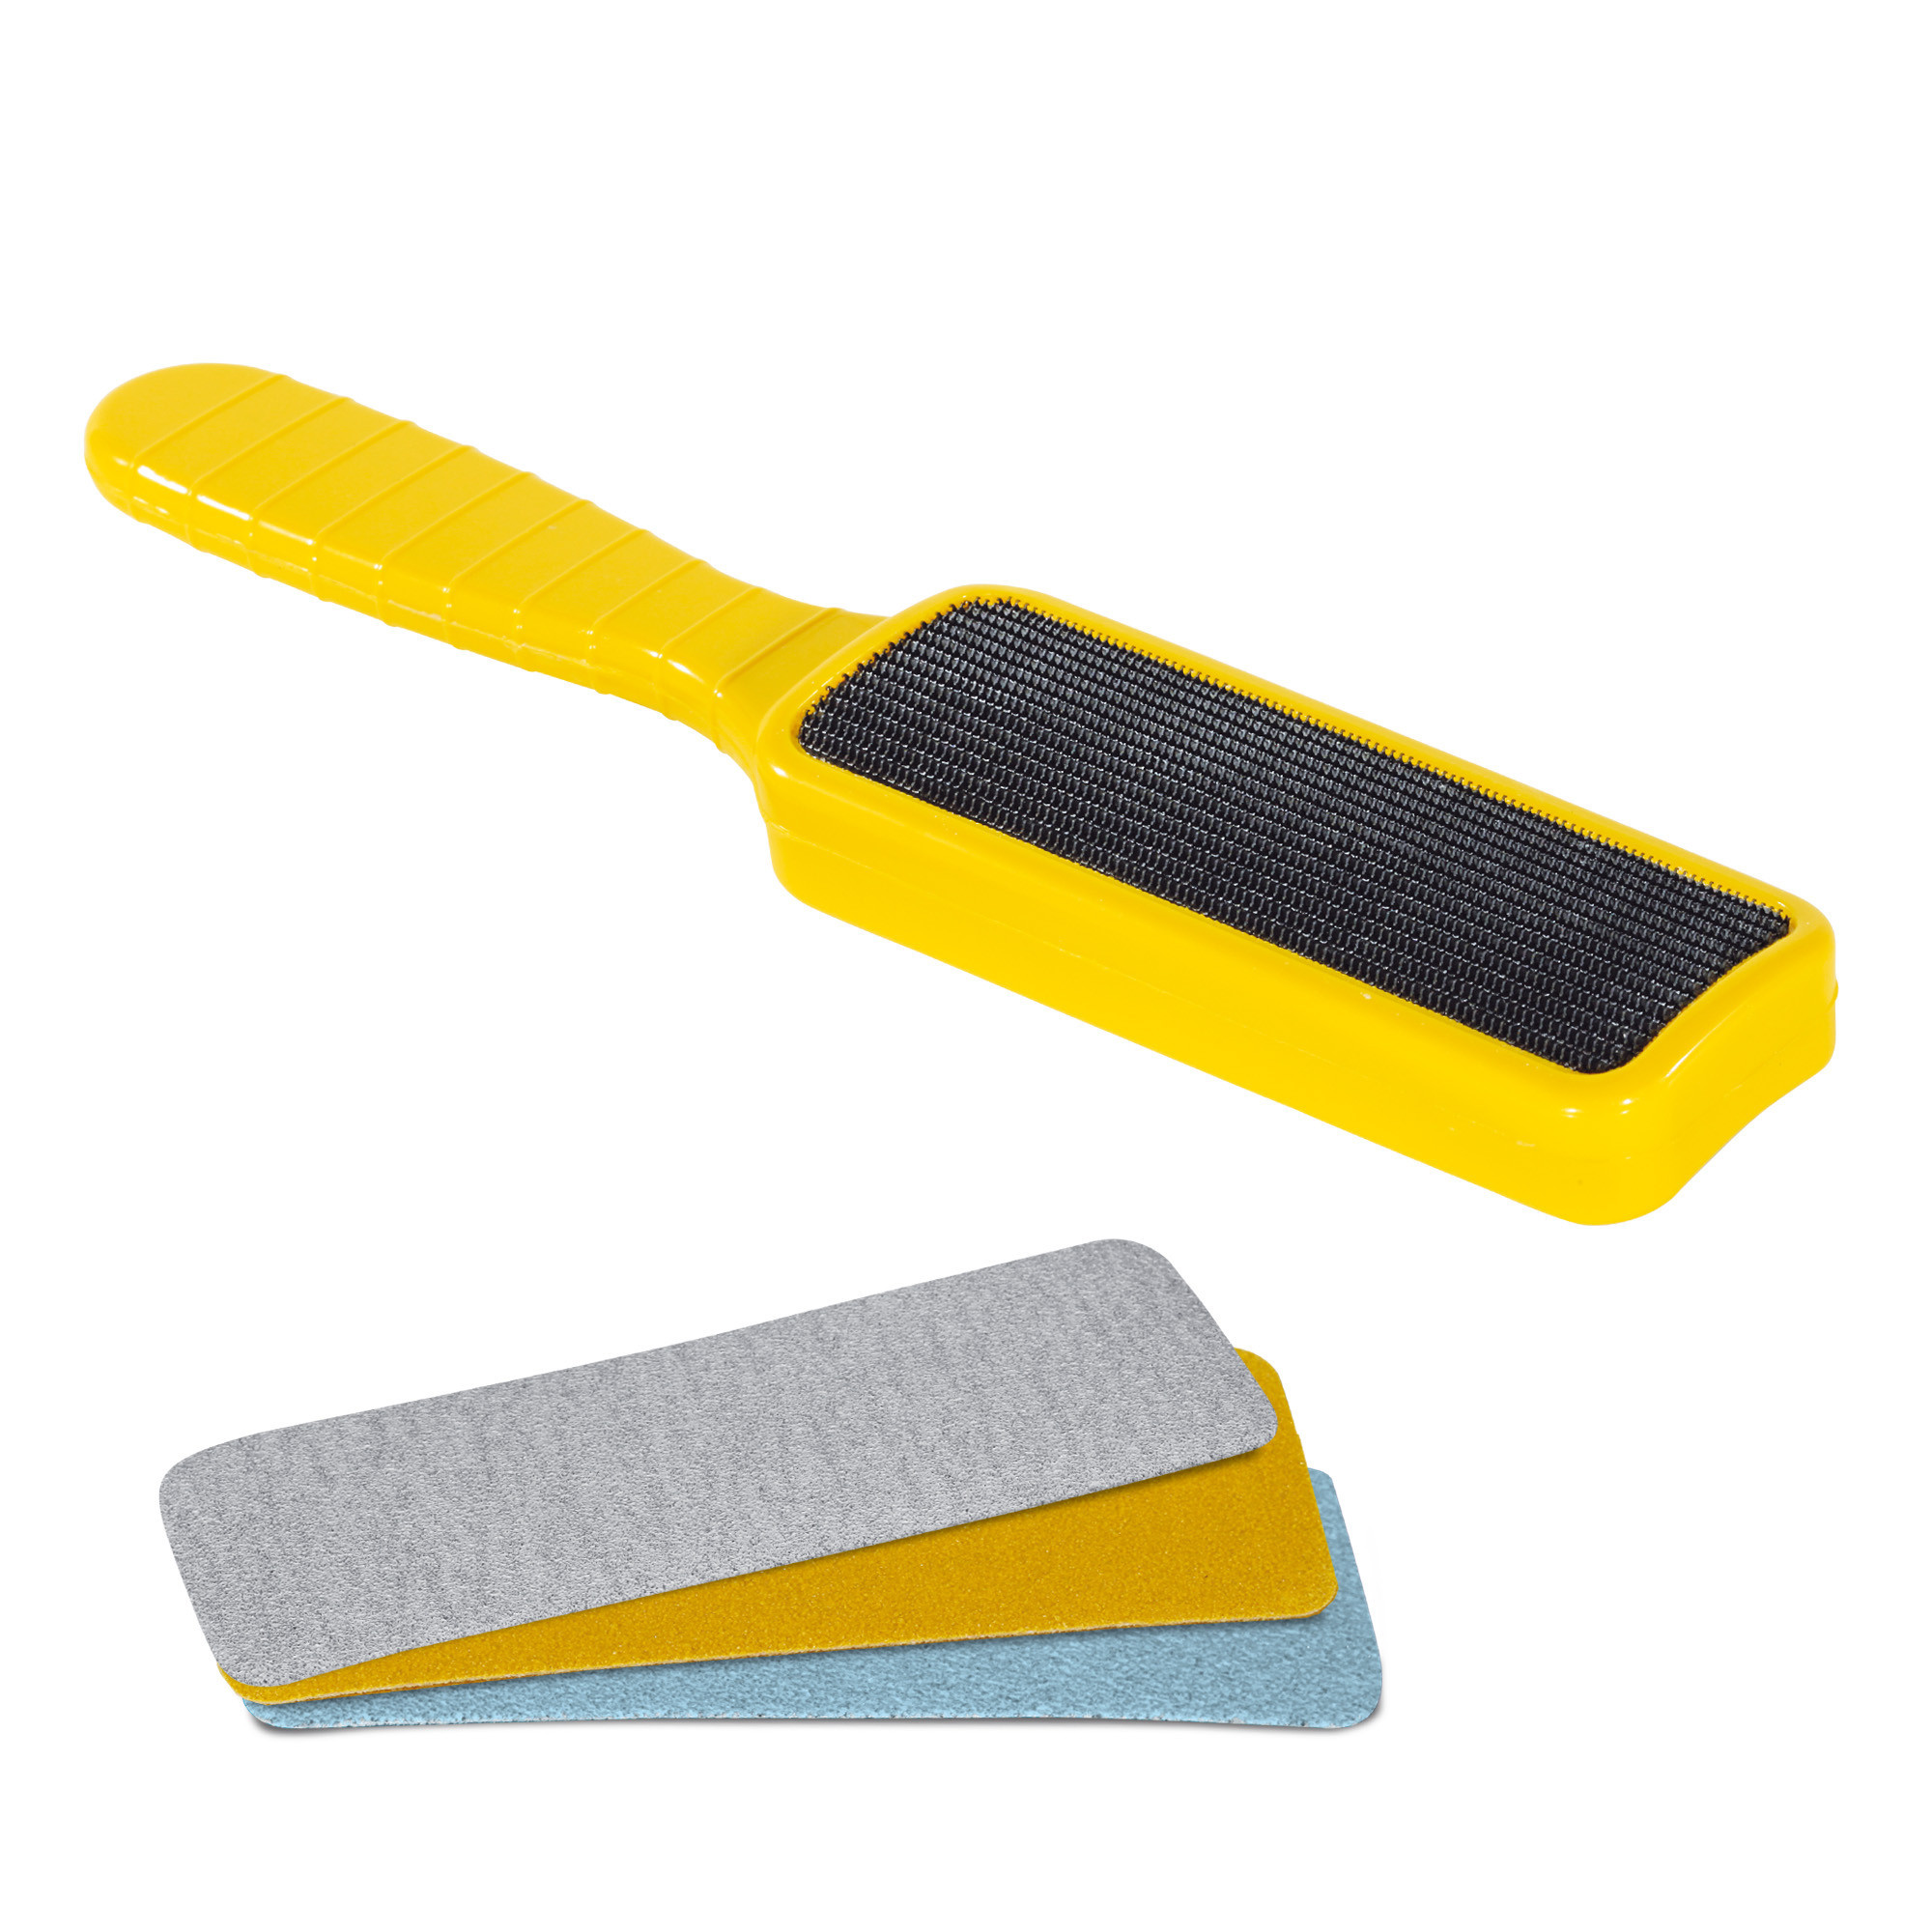 Foot rasp Clean Up with holder for abrasive refills 1 pc